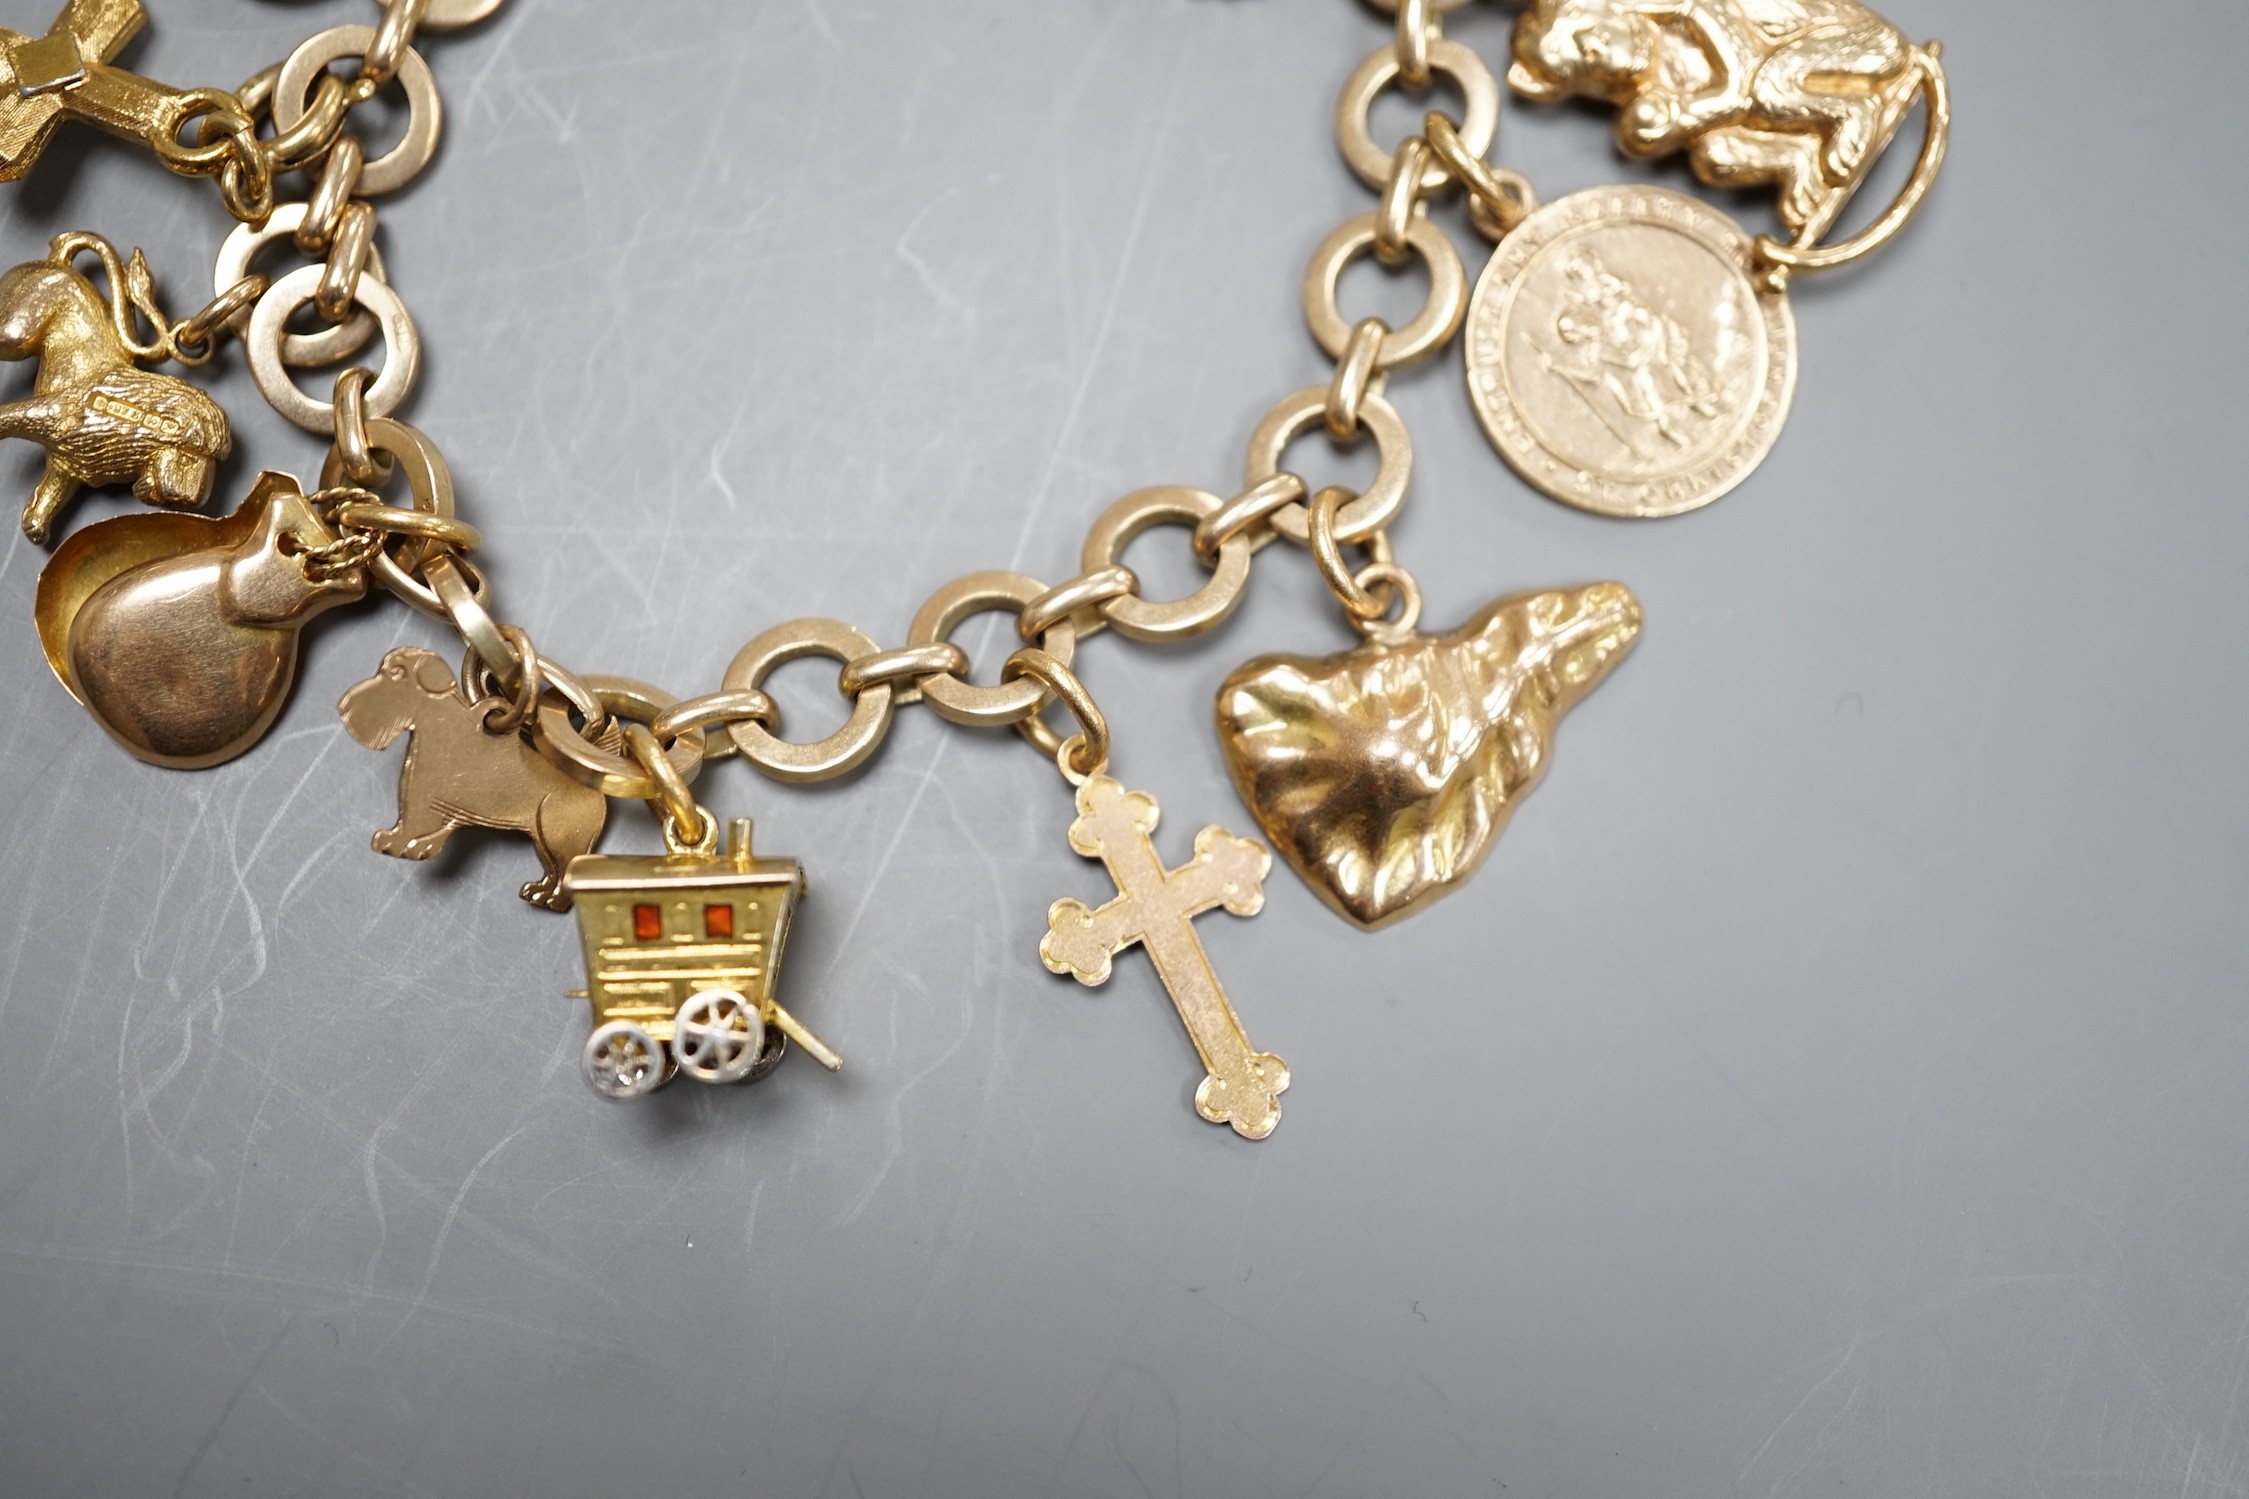 A 9ct gold charm bracelet, hung with assorted charm, including wagon, key, monkey etc. including six 9ct and one 18ct gold, gross weight 33.6 grams.